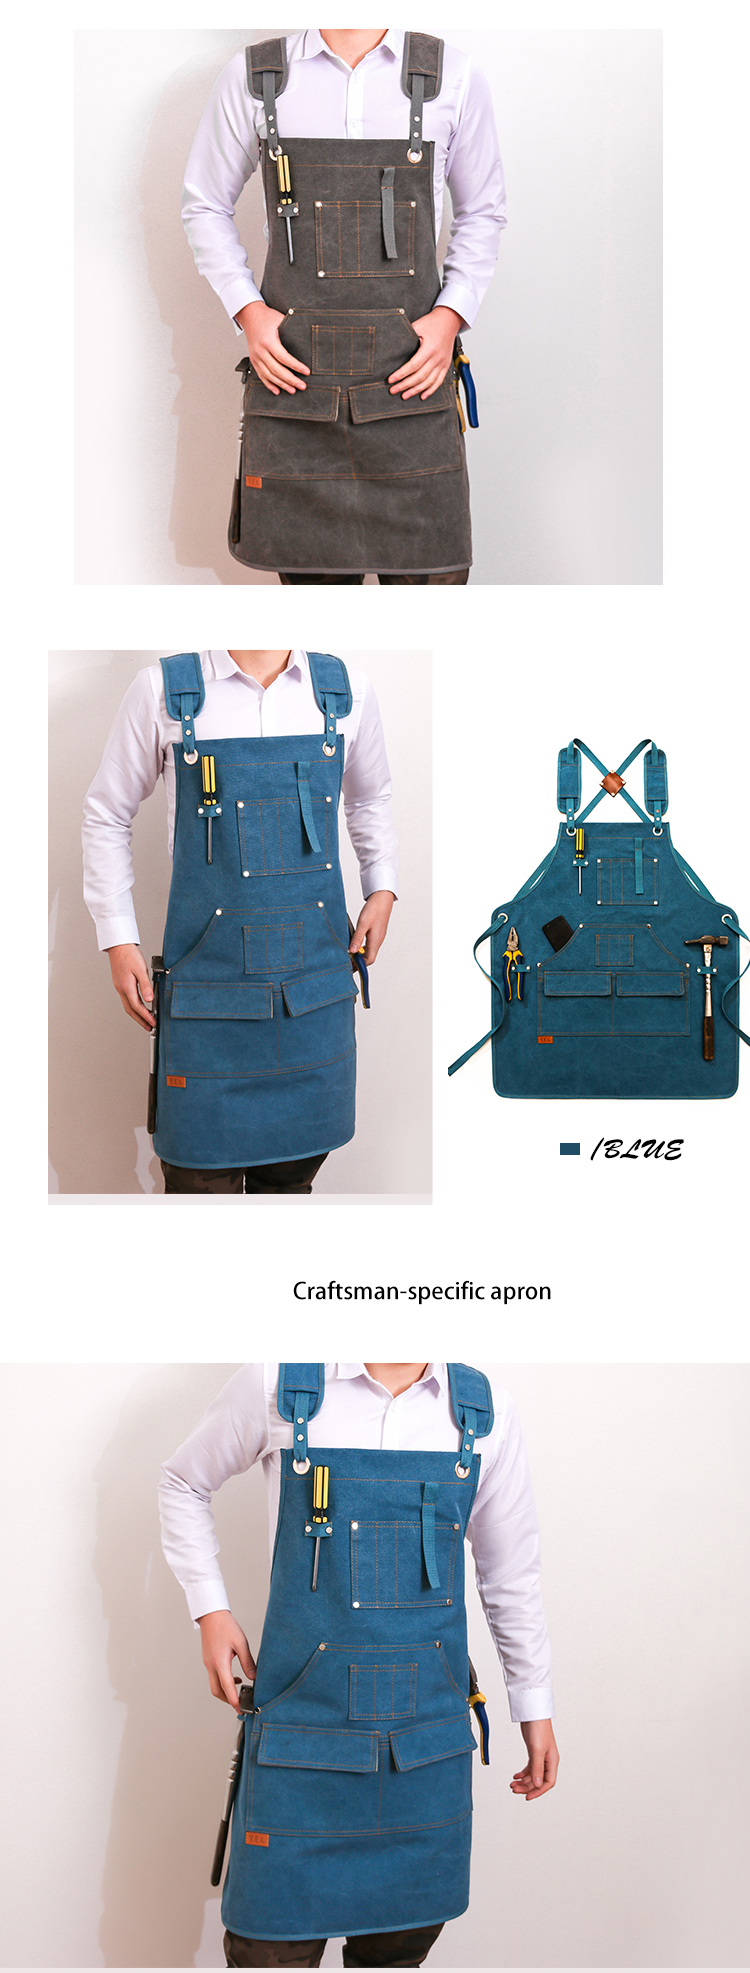 Durable-Work-Apron-Heavy-Duty-Waxed-Unisex-Canvas-Work-Apron-with-Tool-Pockets-Cross-Back-Straps-Adj-1772479-6